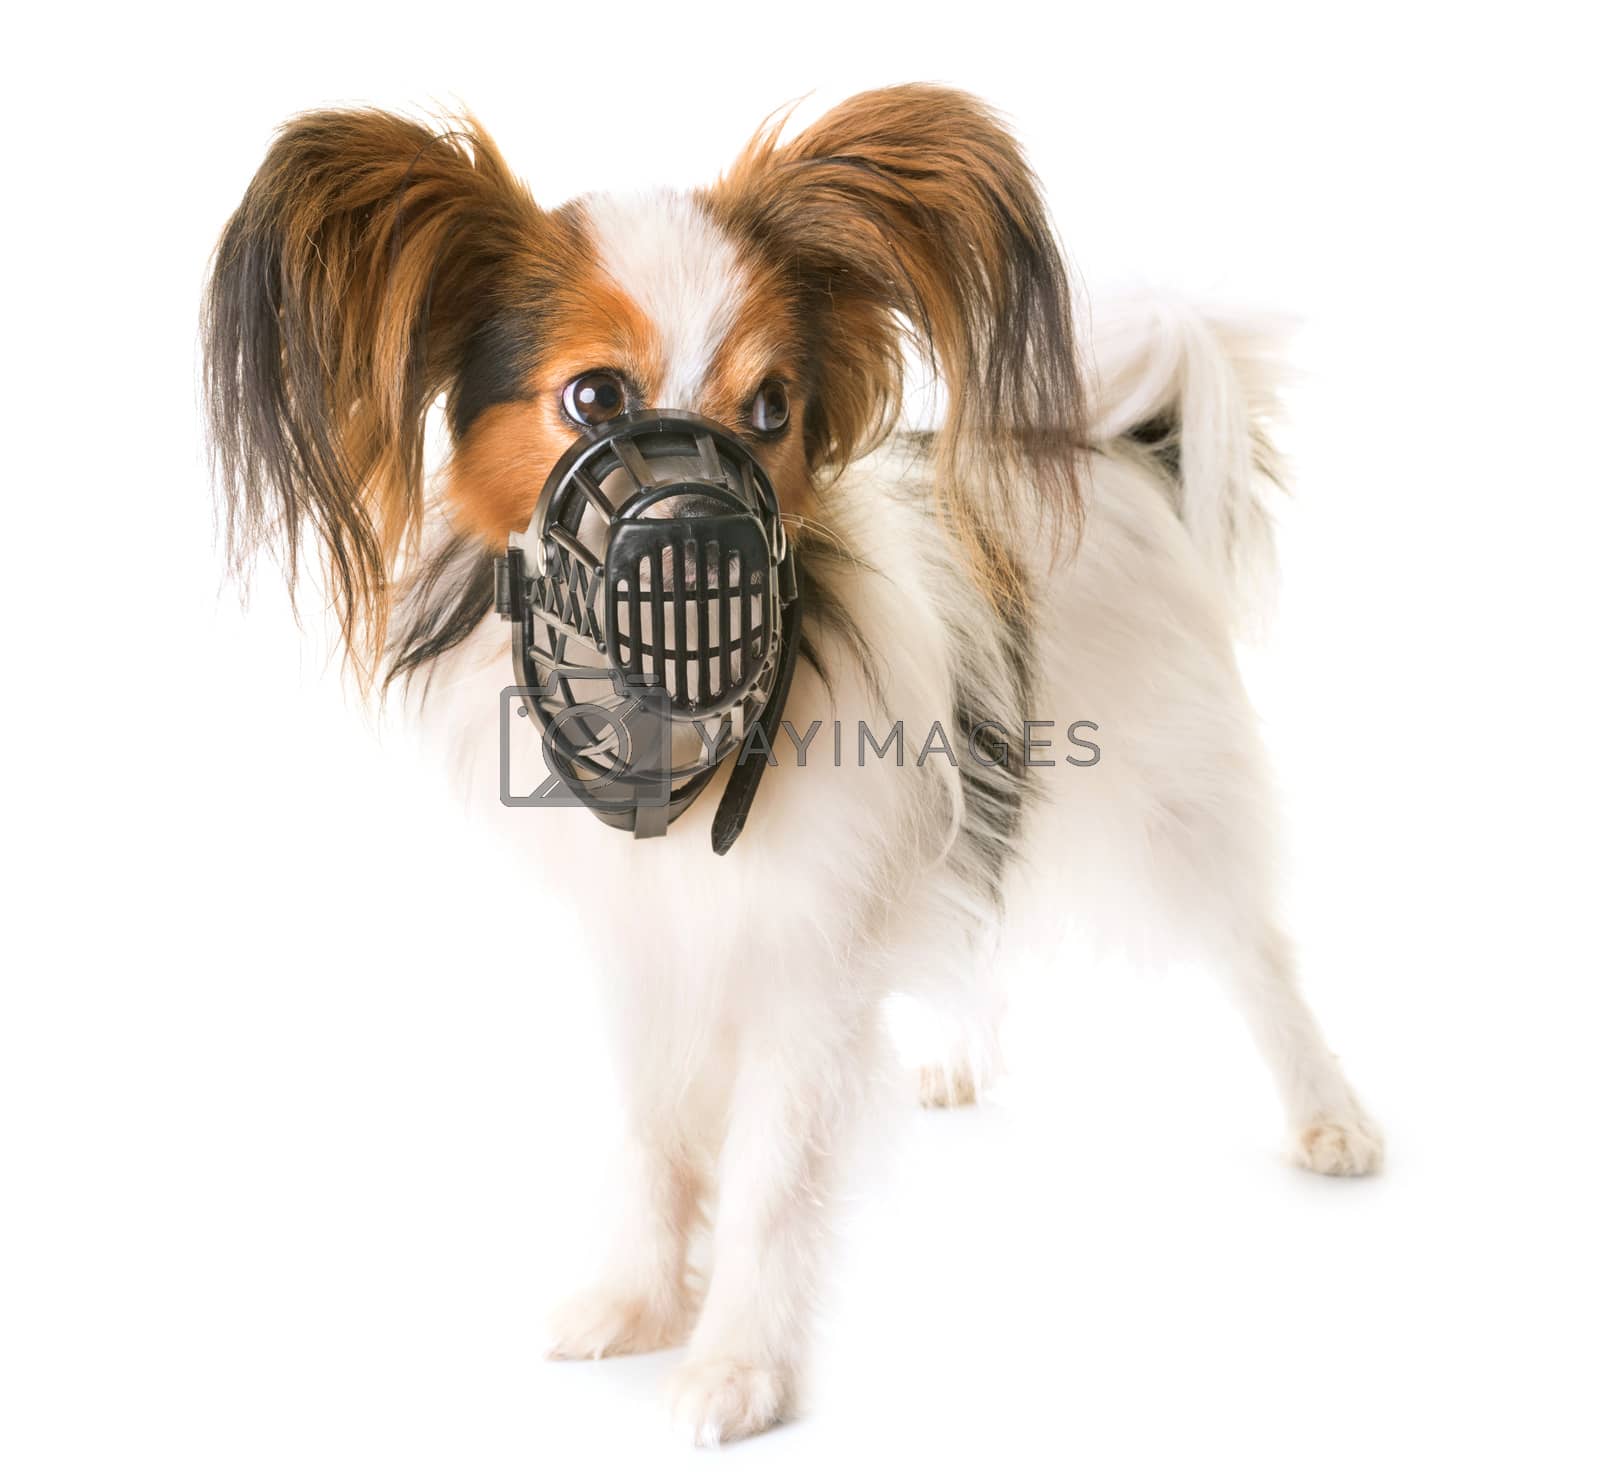 Royalty free image of papillon dog and muzzle by cynoclub